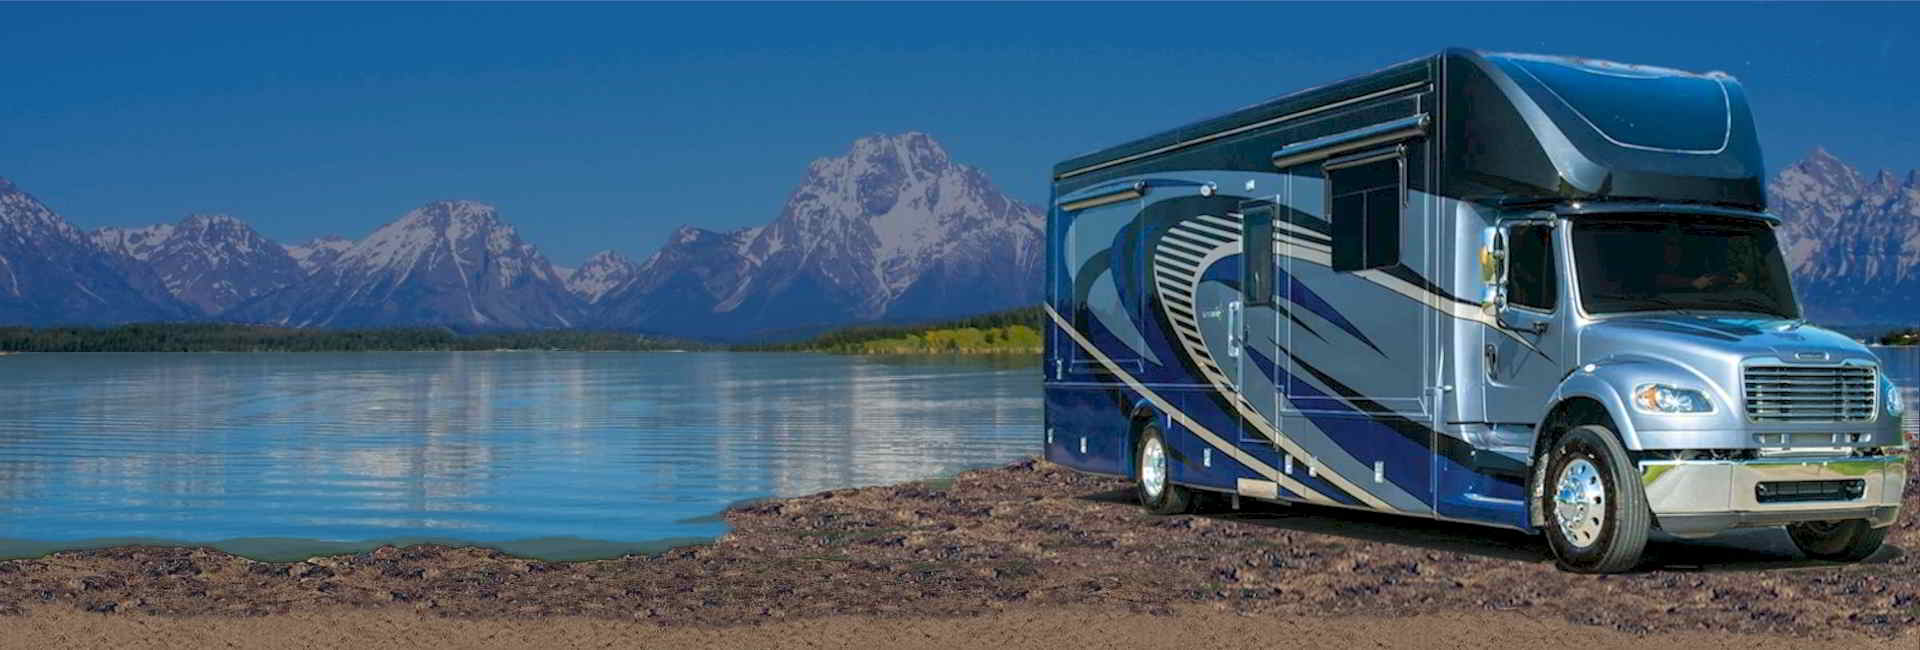 Best Rate RV and Motorhome Financing Banner